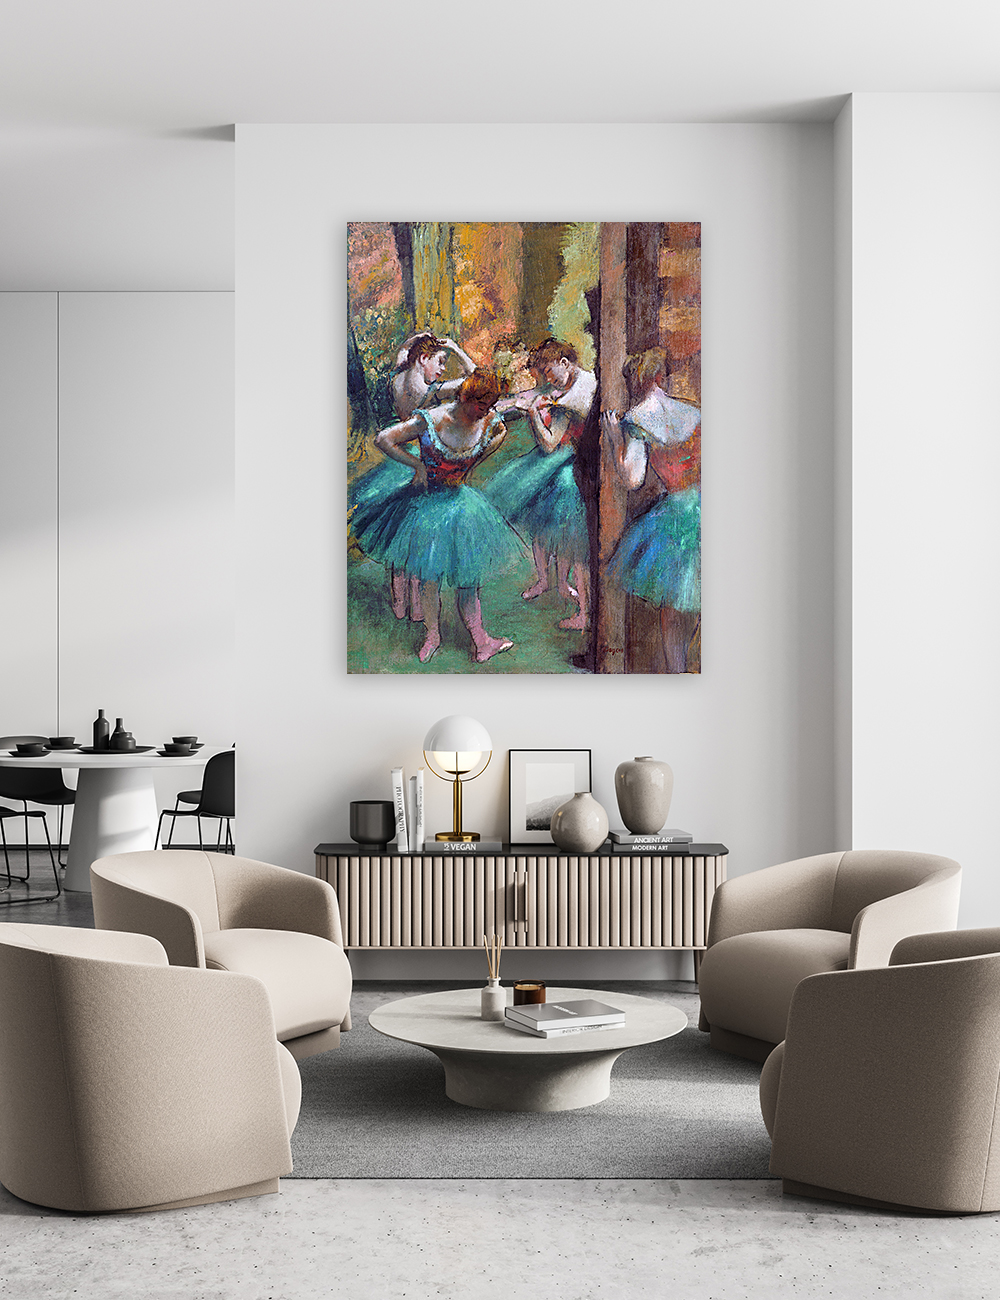 DECORARTS Dancers, Pink and Green by Edgar Degas Art Reproduction. Giclee  Prints Acid Free Cotton Canvas Wall Art for Home Decor W 32